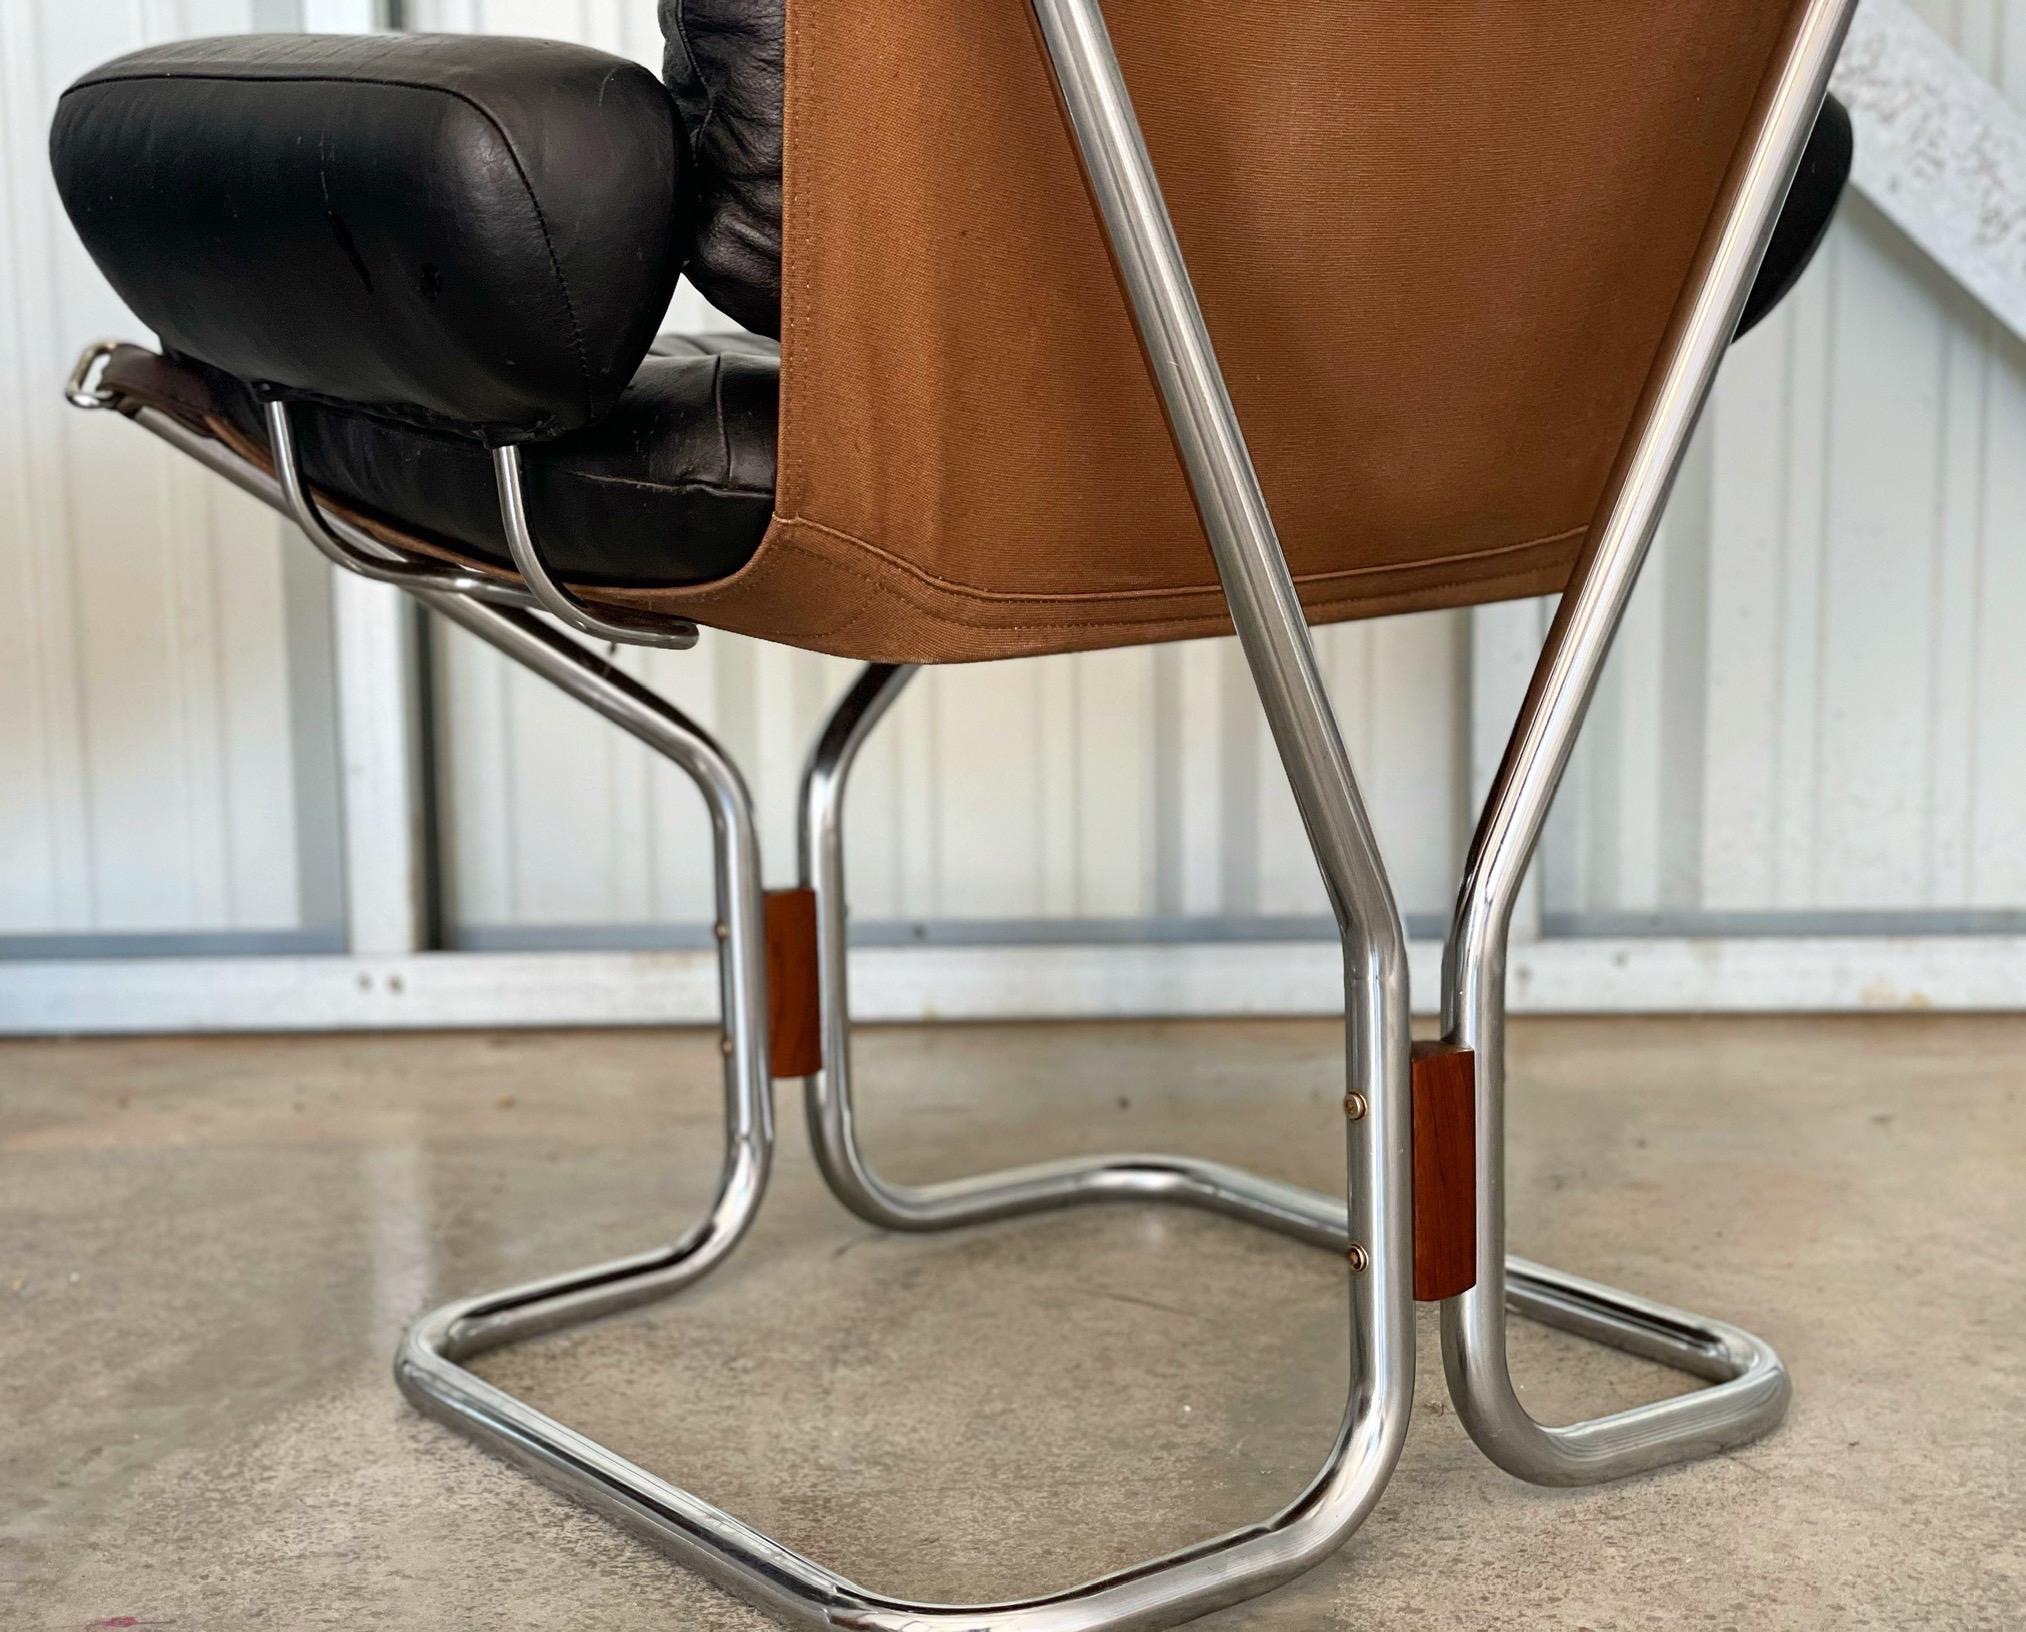 Pair of Midcentury Chairs Black Leather and Chrome, Ingmar Relling for Westnofa 3